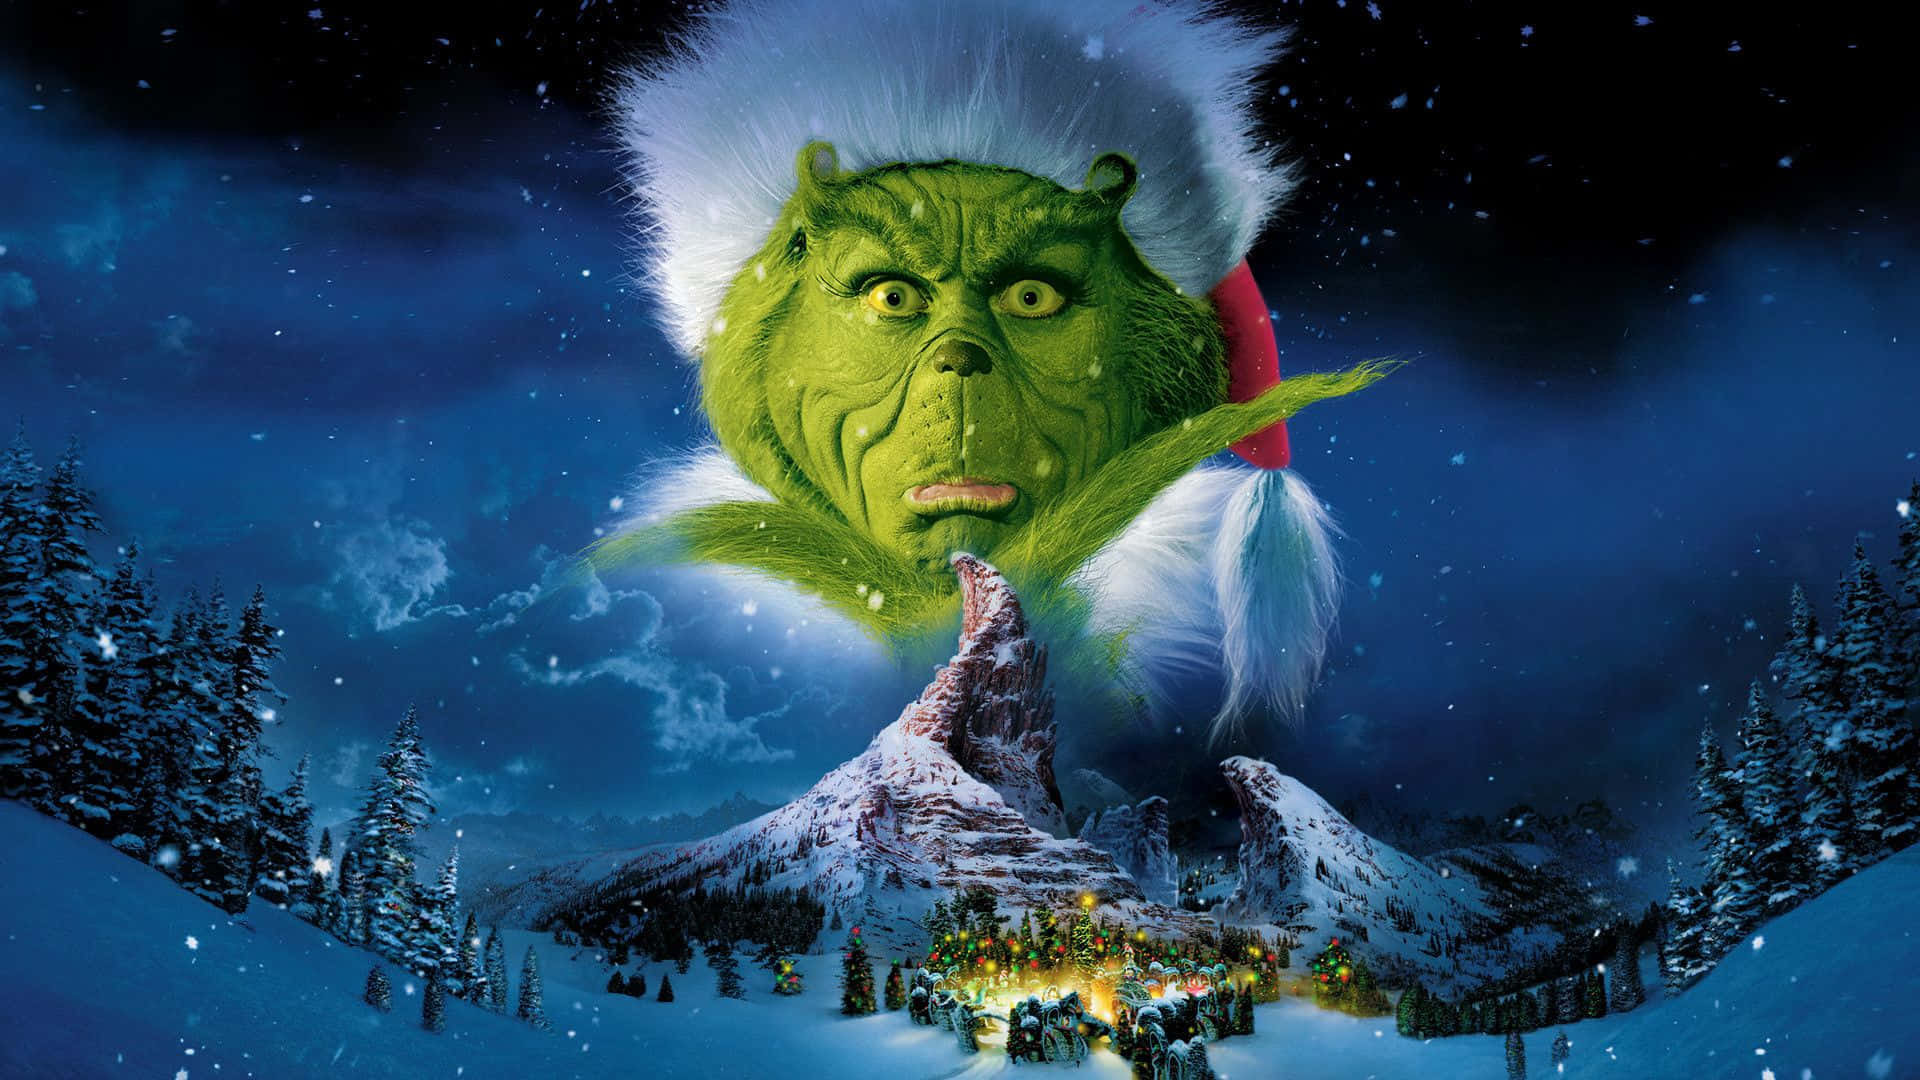 The Grinch In The Snow